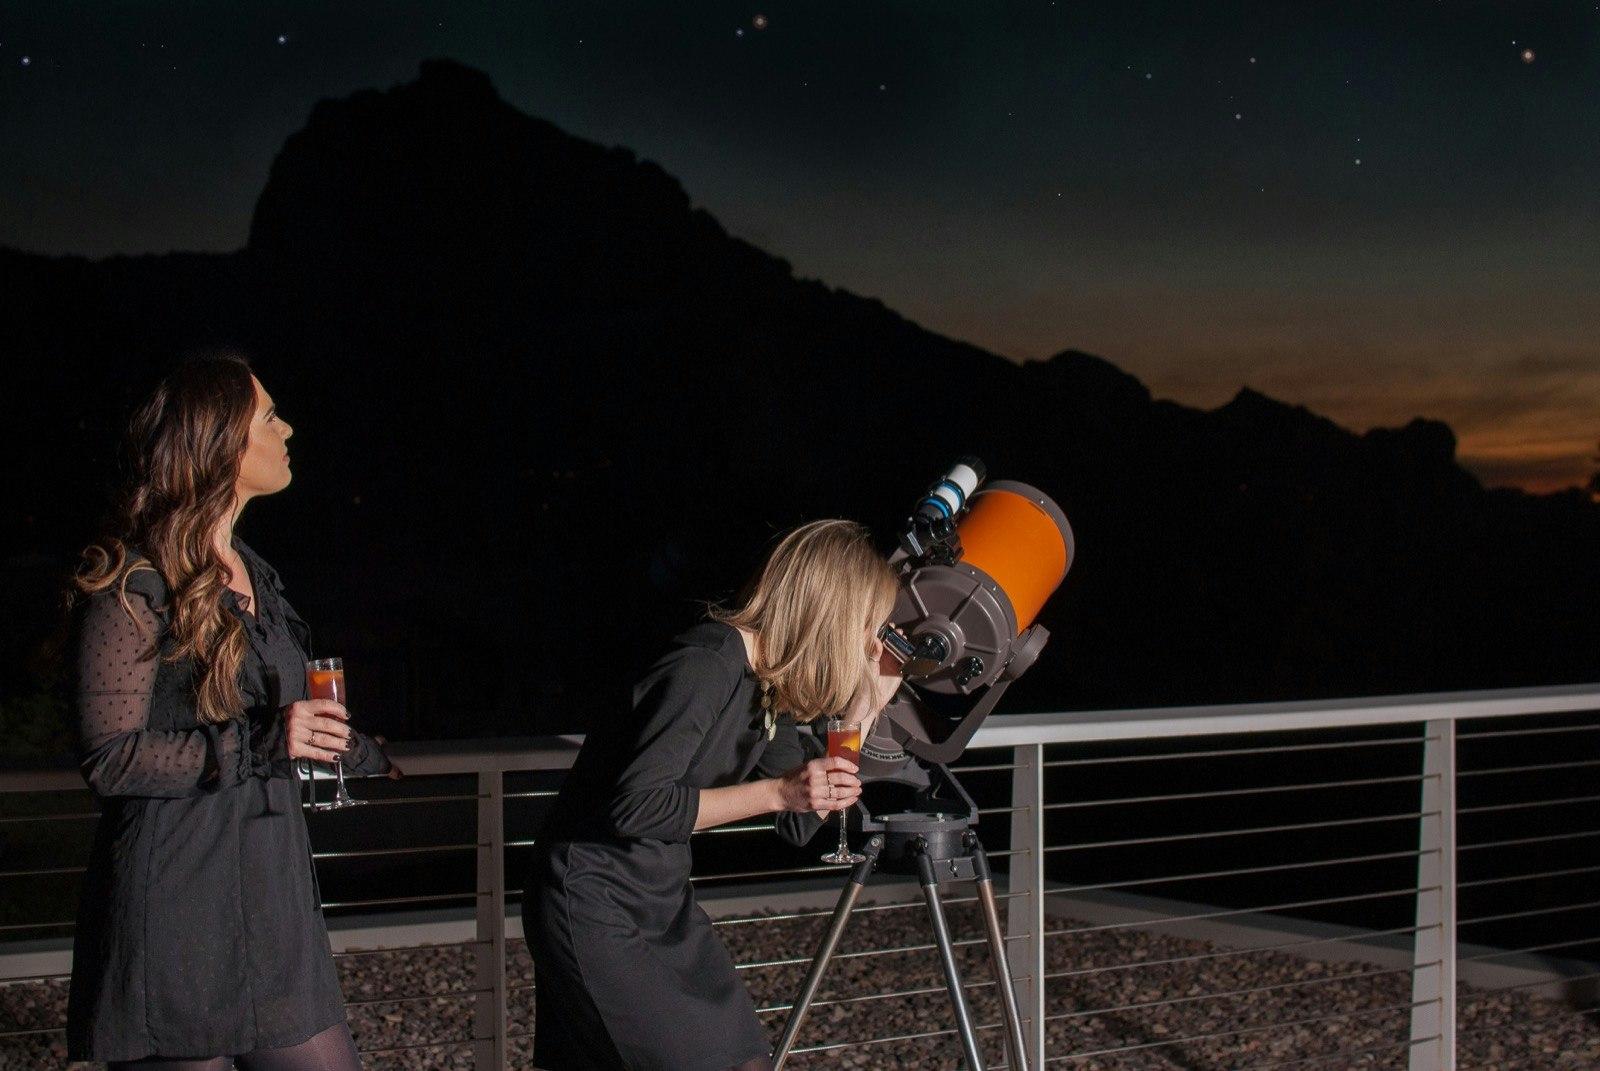 Two women hold cocktails while one looks through a telescope at a night sky